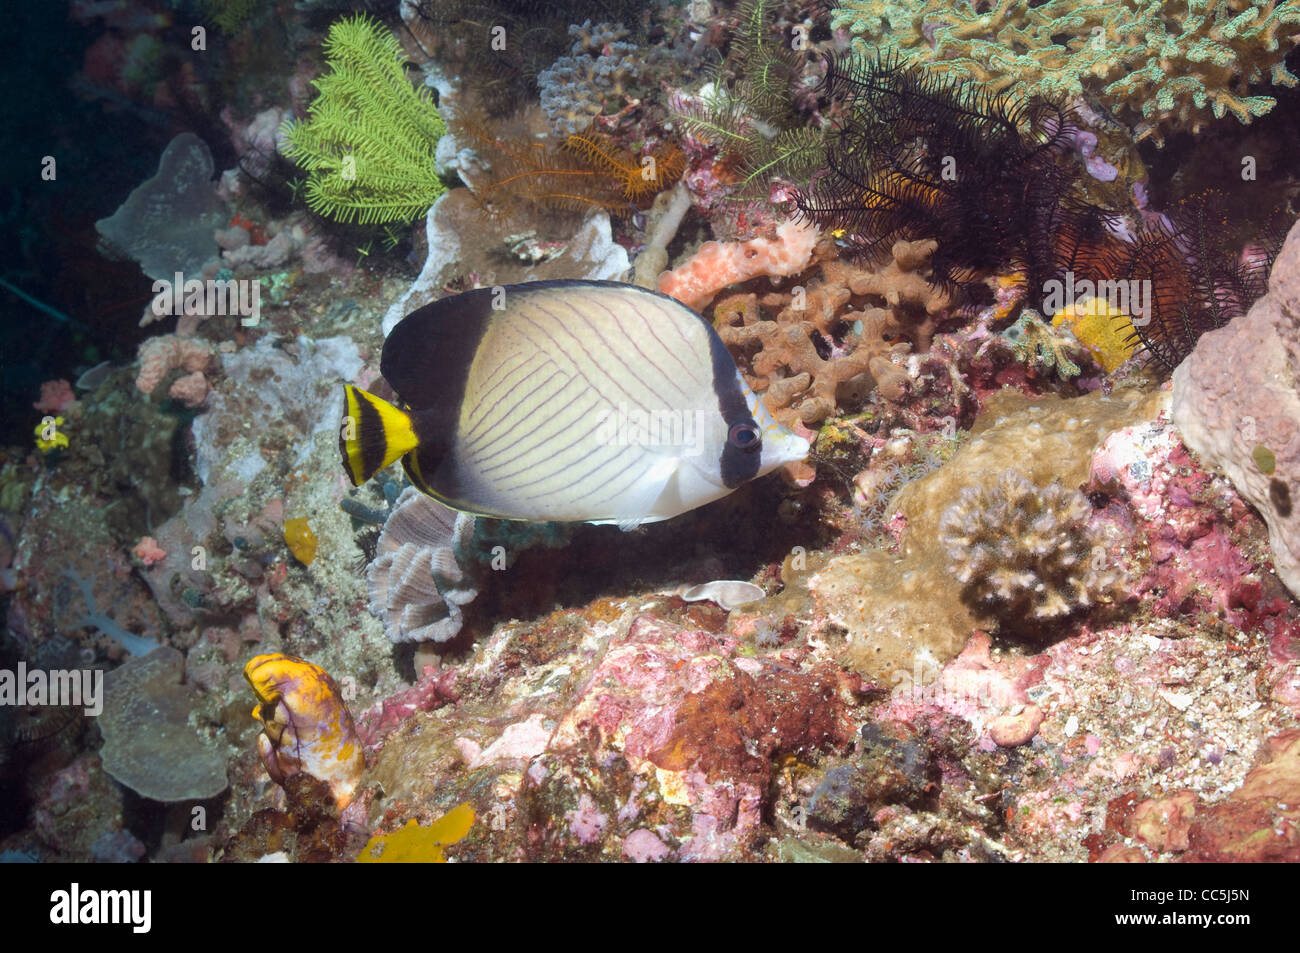 Indian vagabond butterflyfish (Chaetodon decussatus) with a black coral bush. Komodo NP, Indonesia. Stock Photo